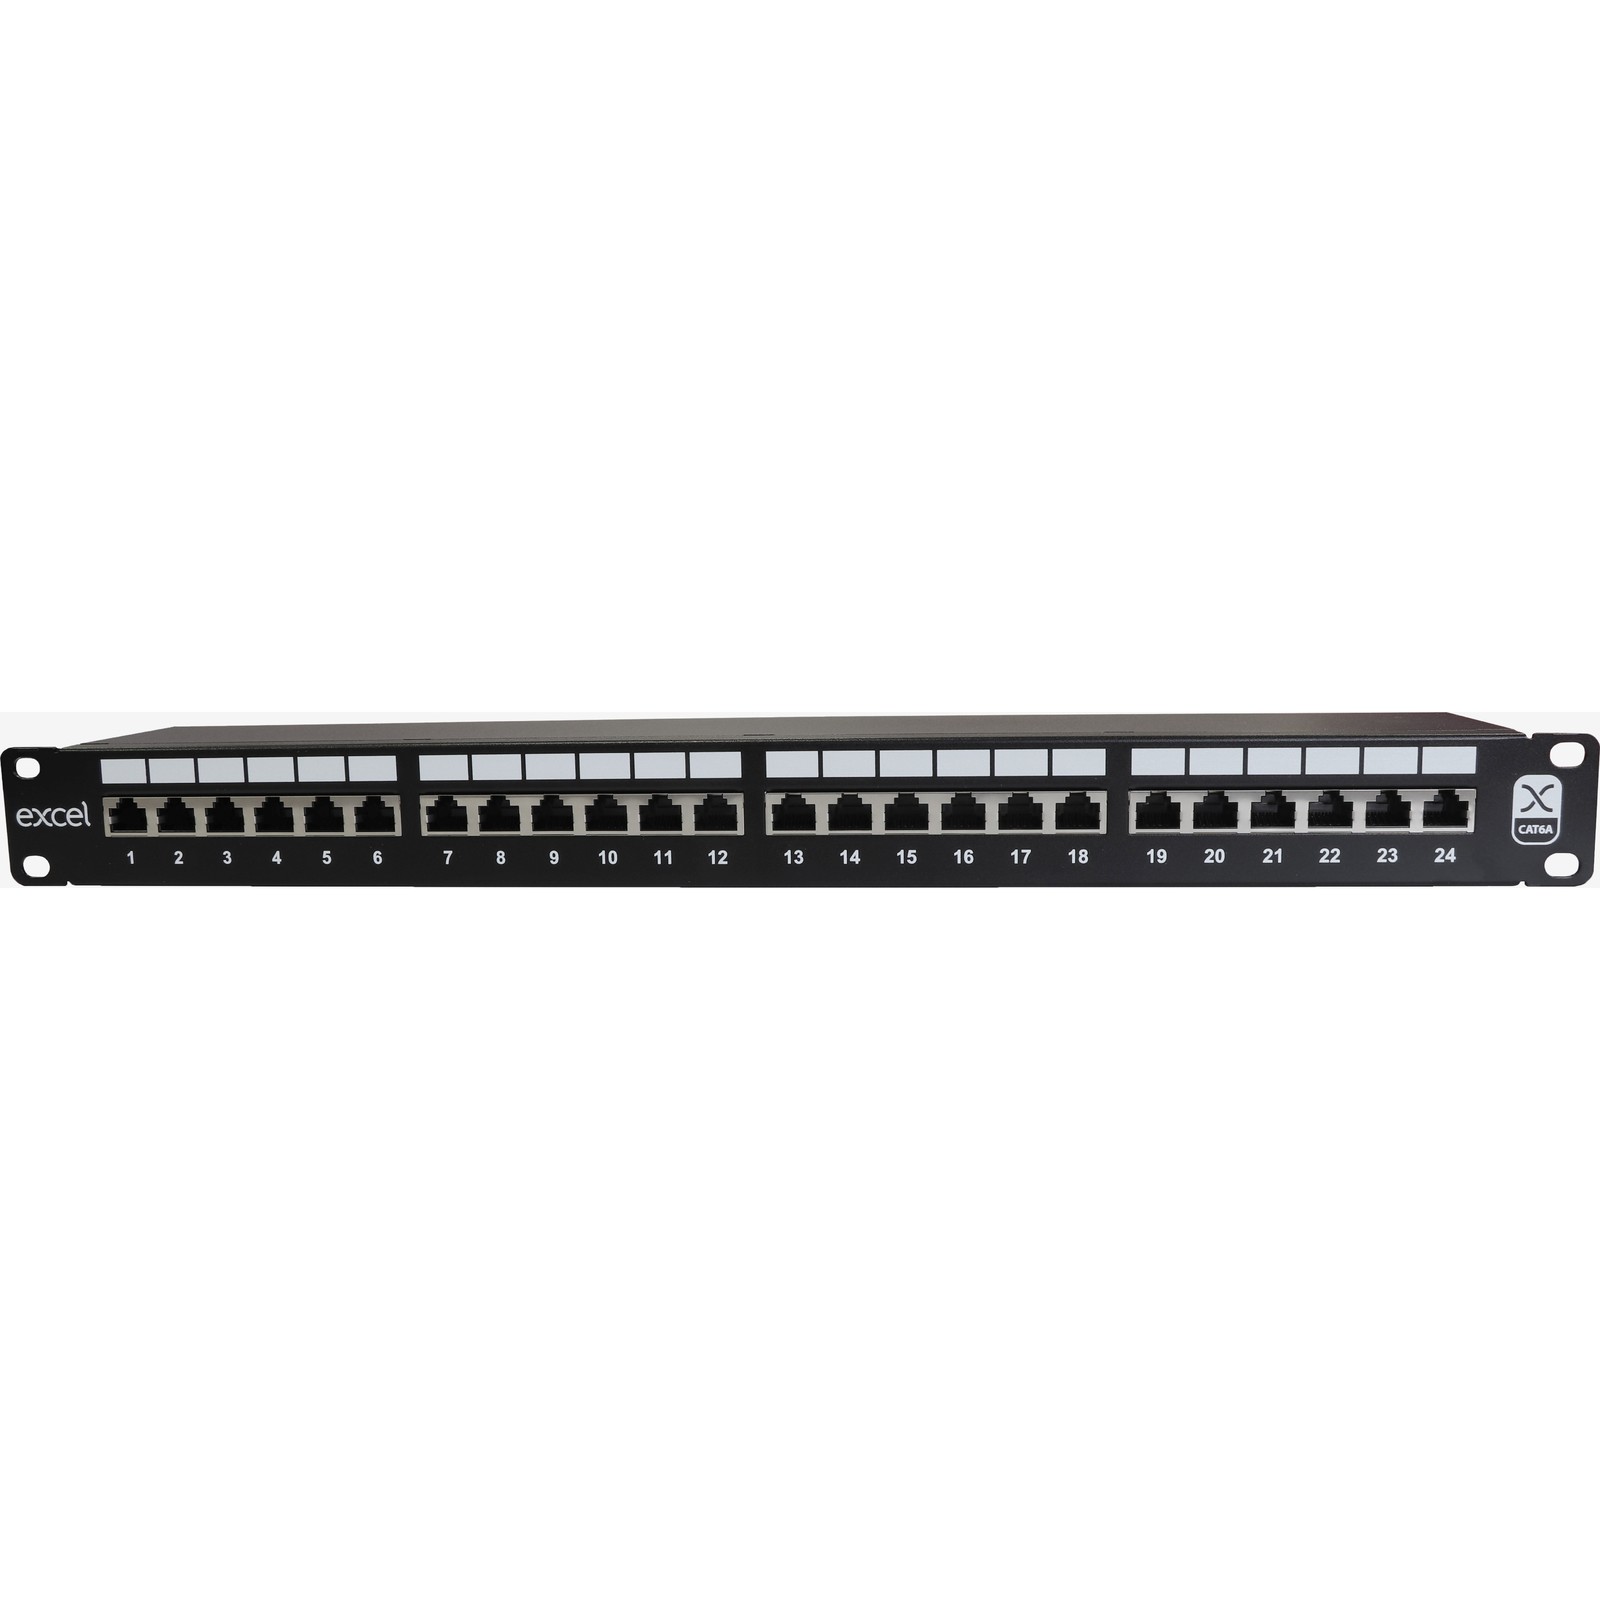 Excel Cat6A 24 Port Screened Patch Panel 1U LSA Punch Down Black